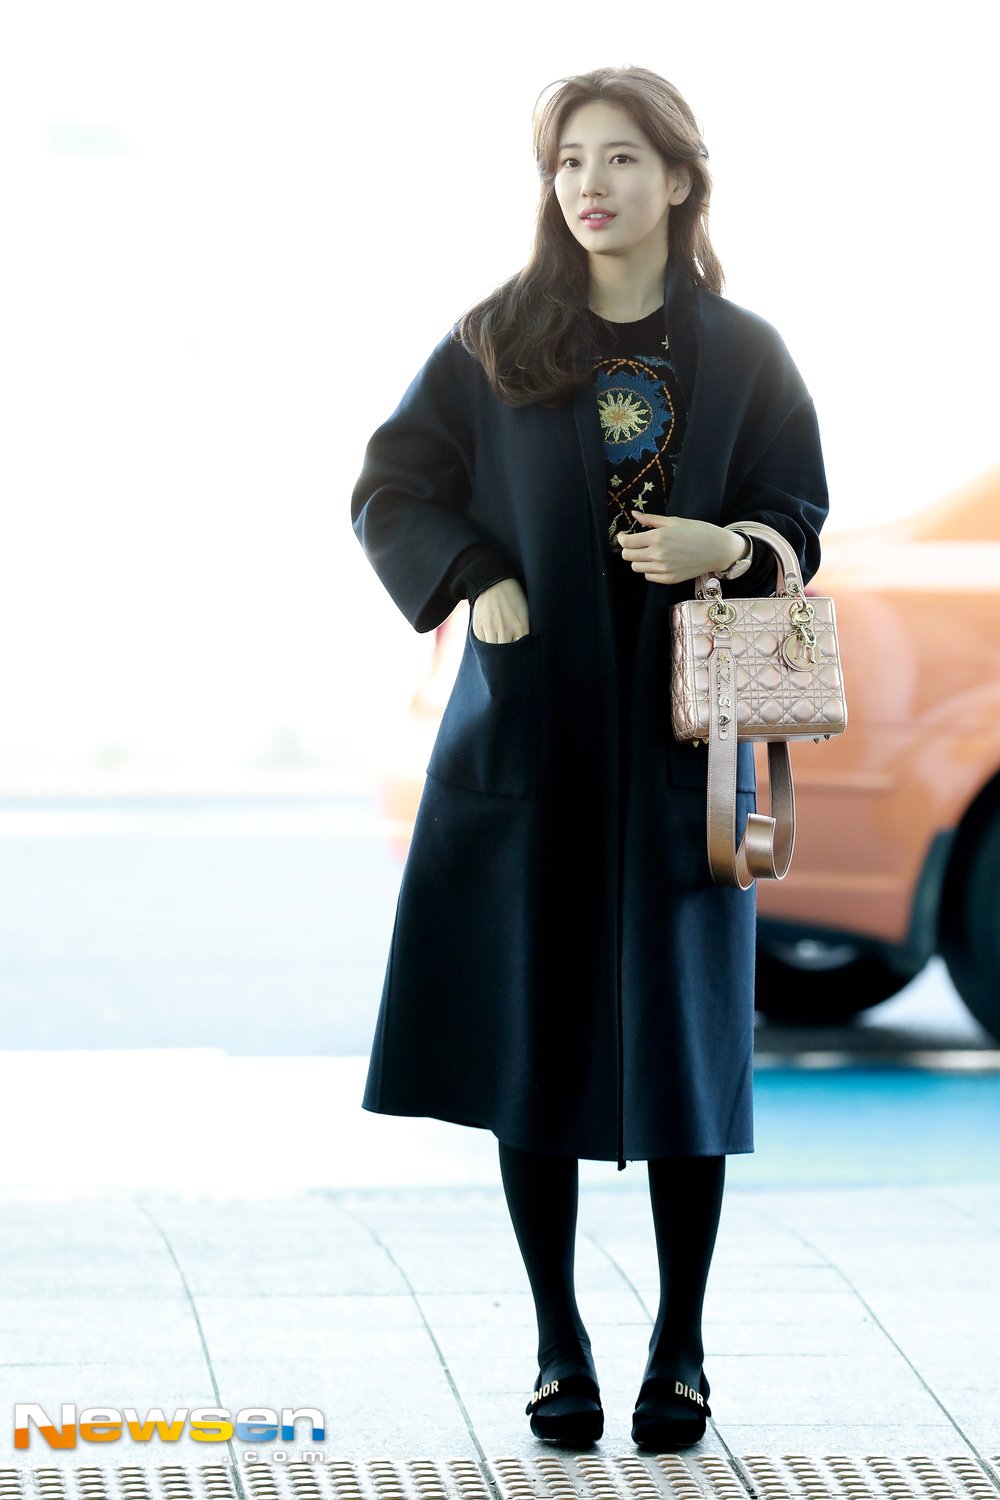 Singer and actor Bae Suzy left France Paris on the afternoon of February 24 to attend the Paris collection through the Incheon International Airport in Unseo-dong, Jung-gu, Incheon.Singer and actor Bae Suzy is leaving for France Paris with an airport fashion.kim ki-tae